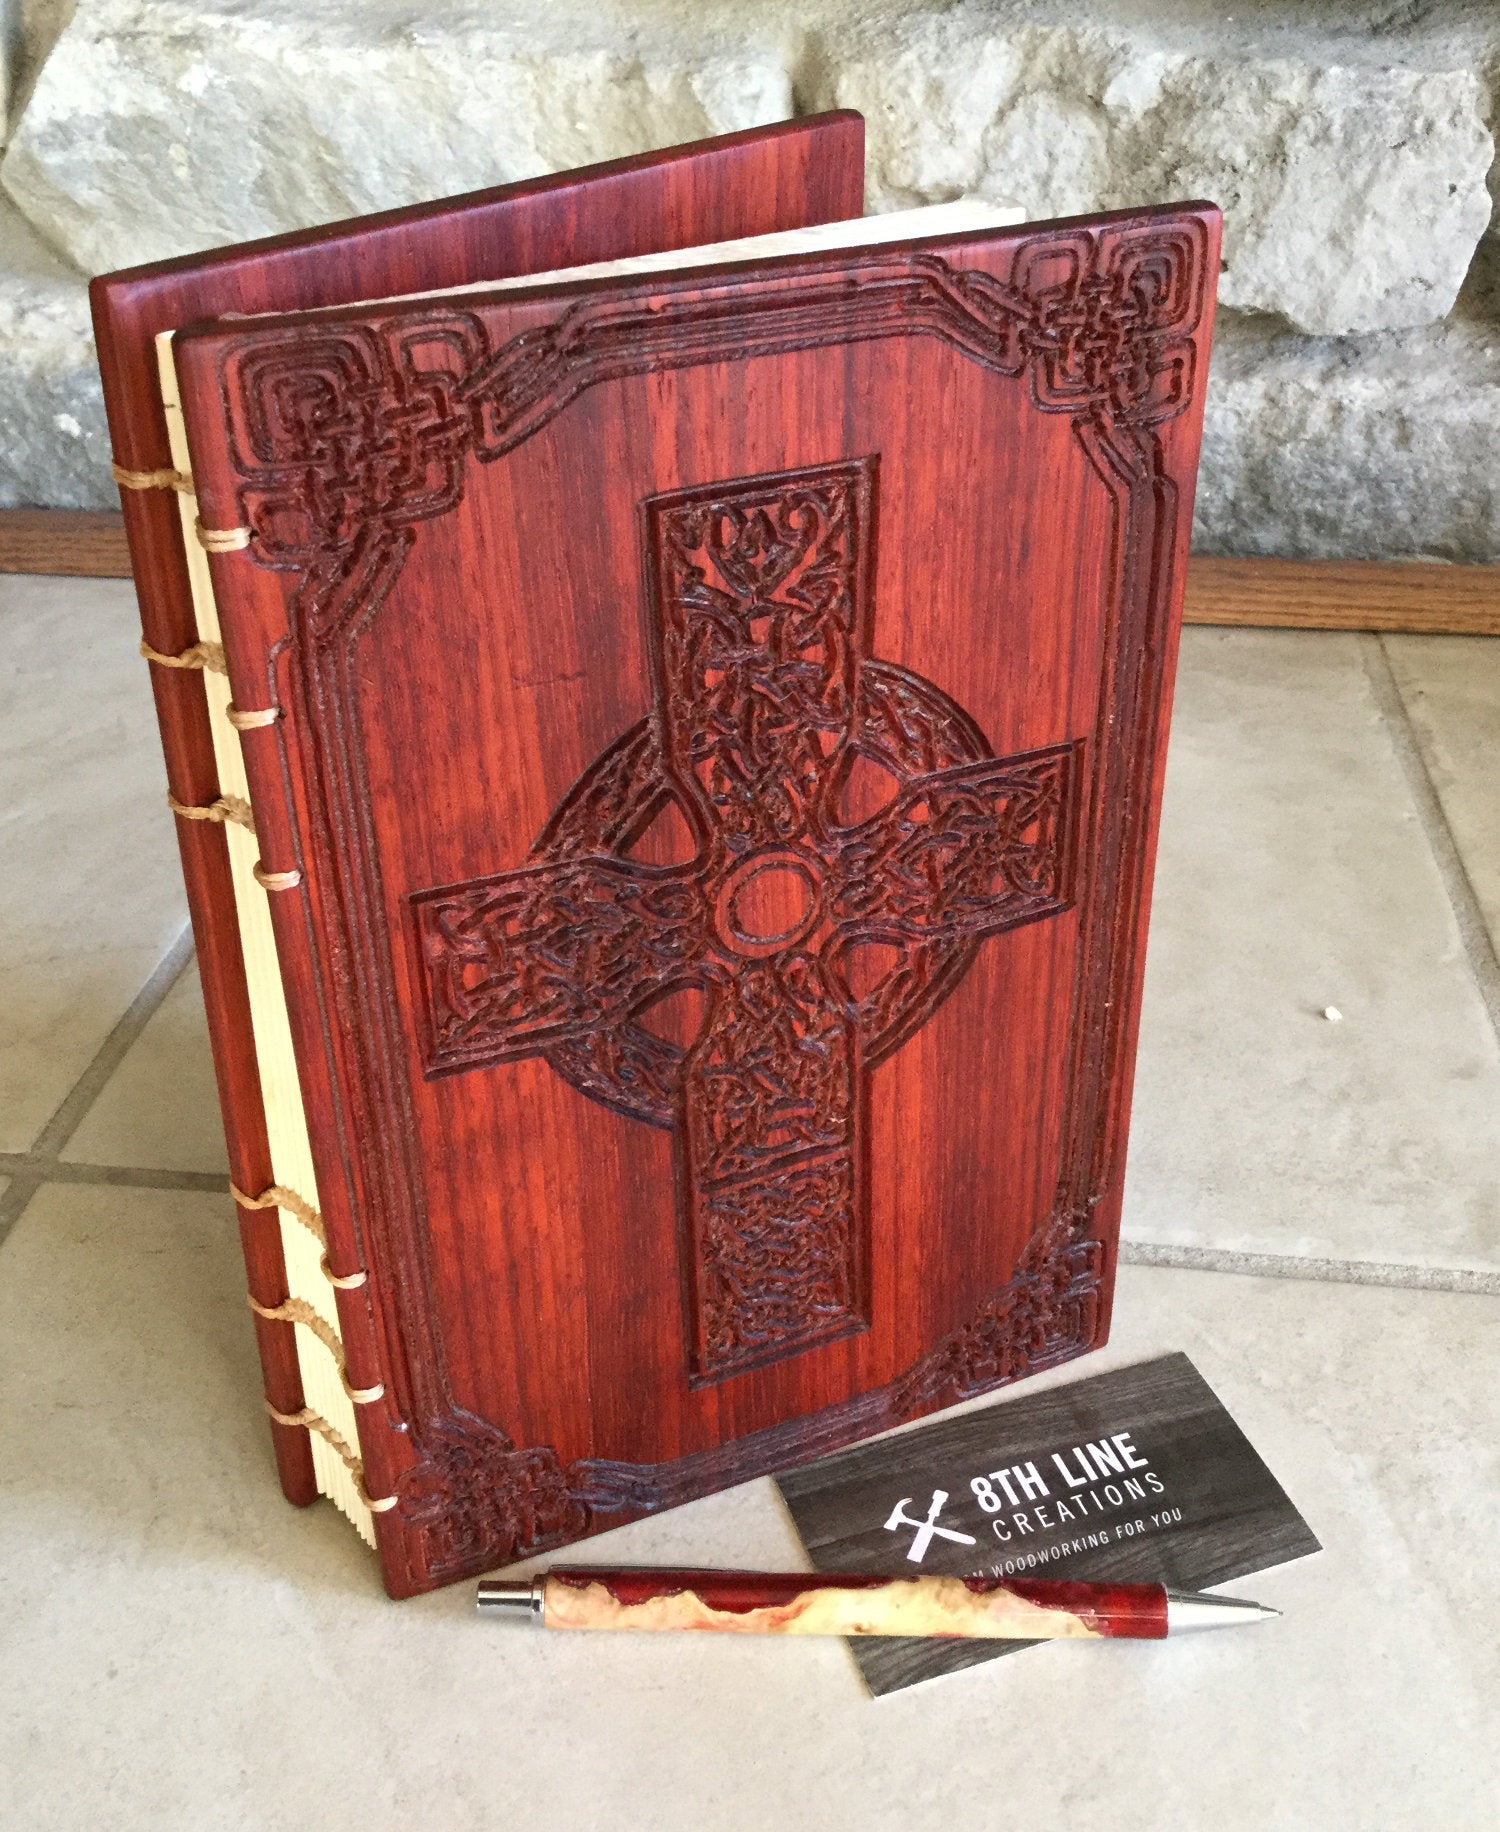 Celtic cross carved coptic stitched journal, Mother's day gift - padauk Custom Carved Journals, Guest Books, Journals and Notebooks 8th Line Creations 